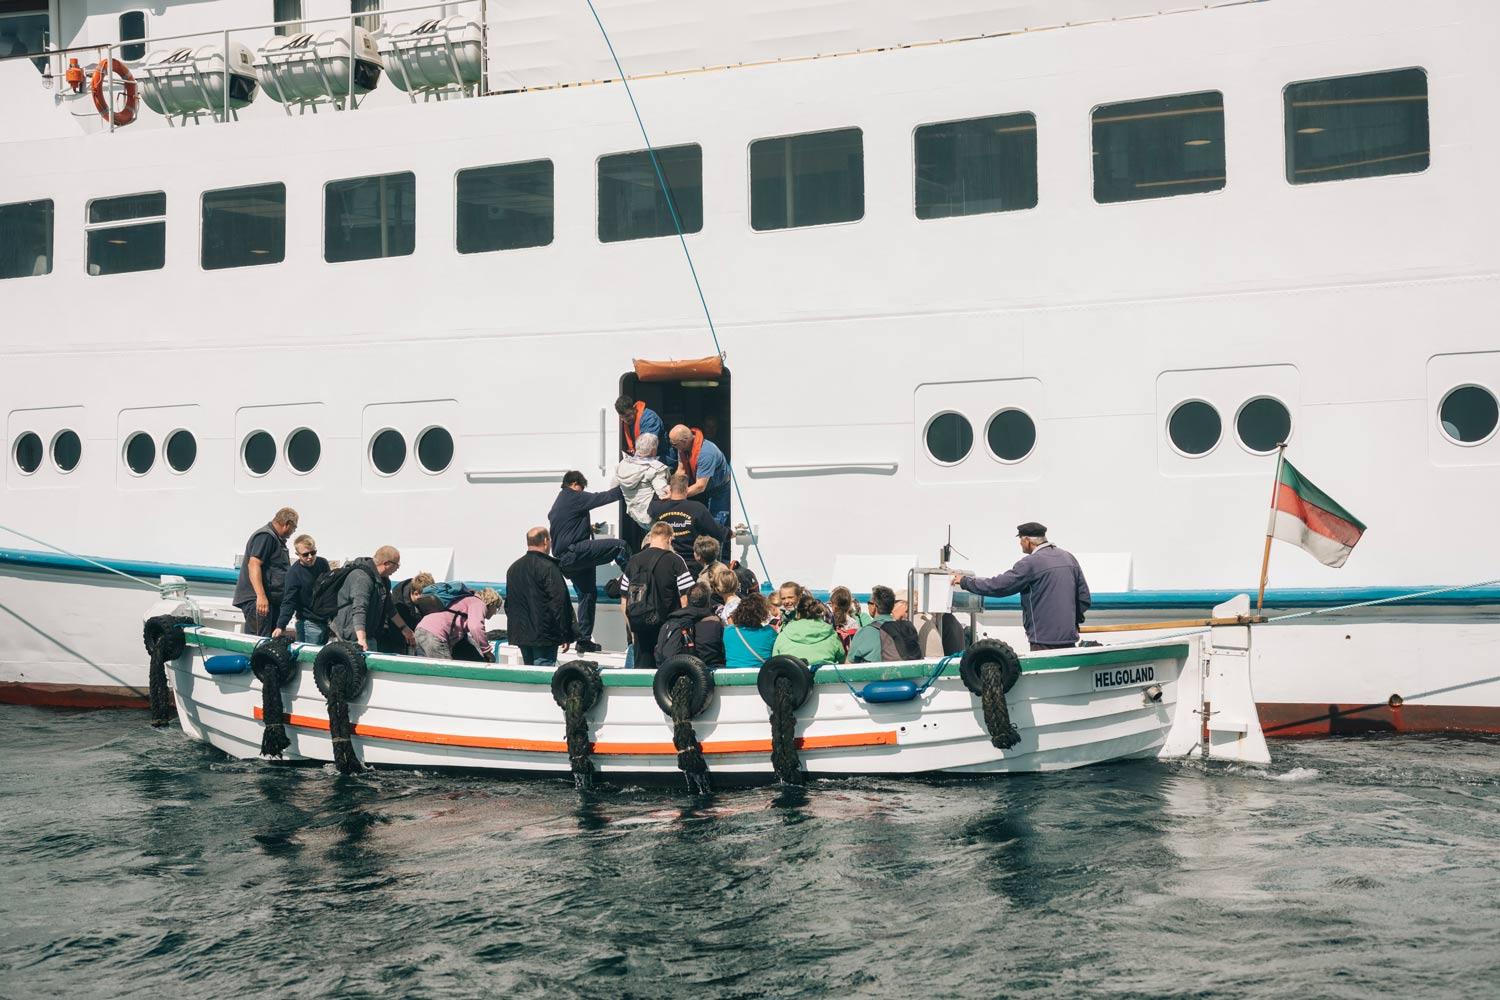 The Börteboot crew picks up tourists from ships that are too large to enter the island’s harbour